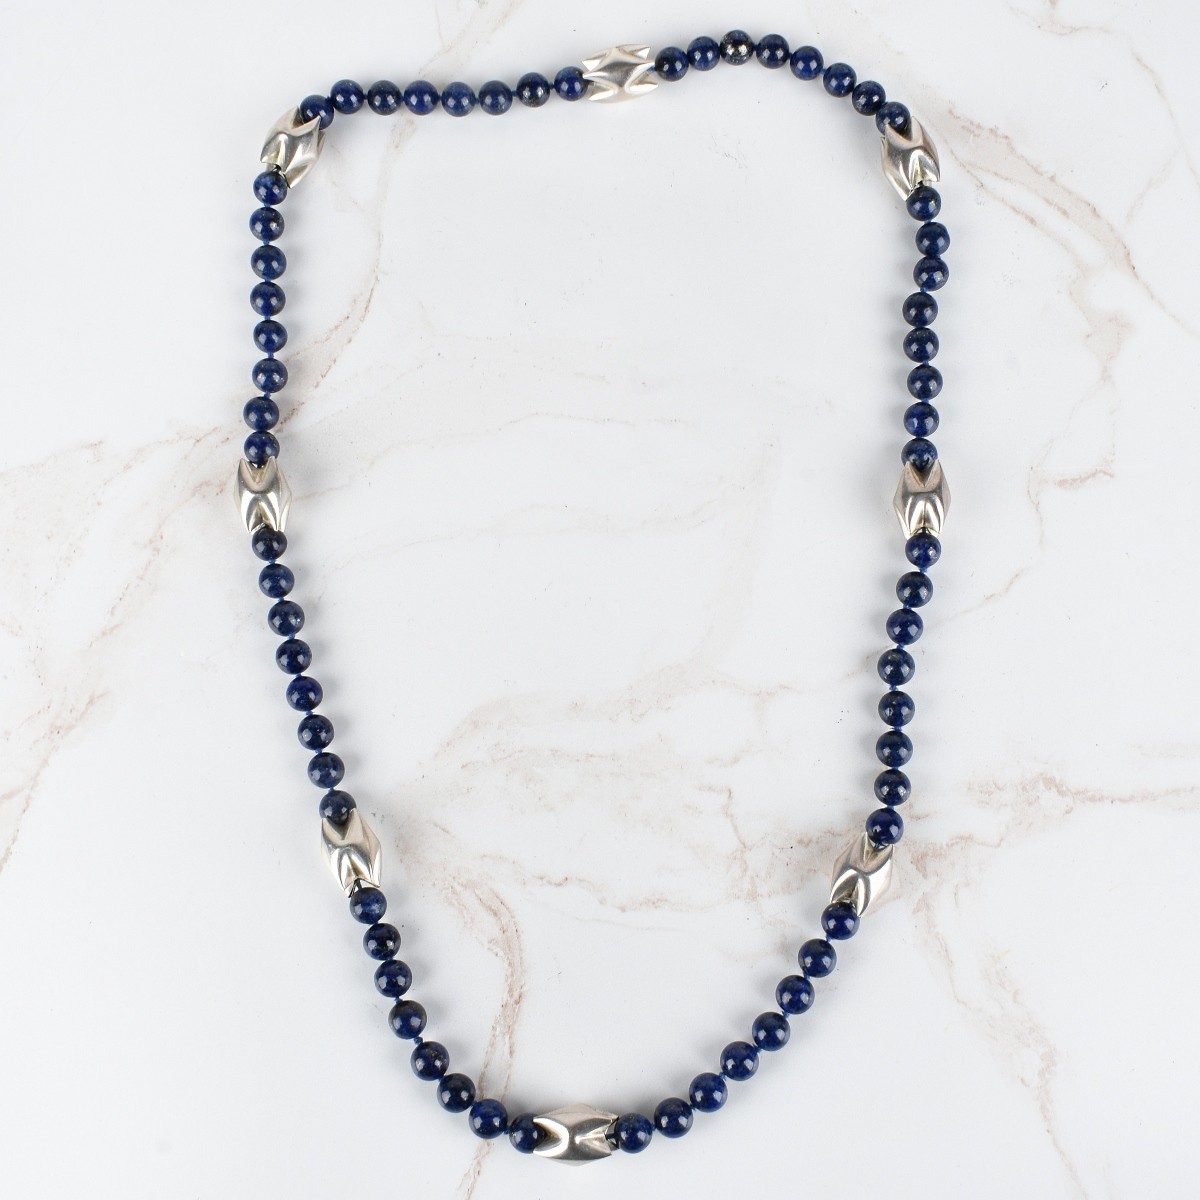 Lapis Bead and Silver Necklace